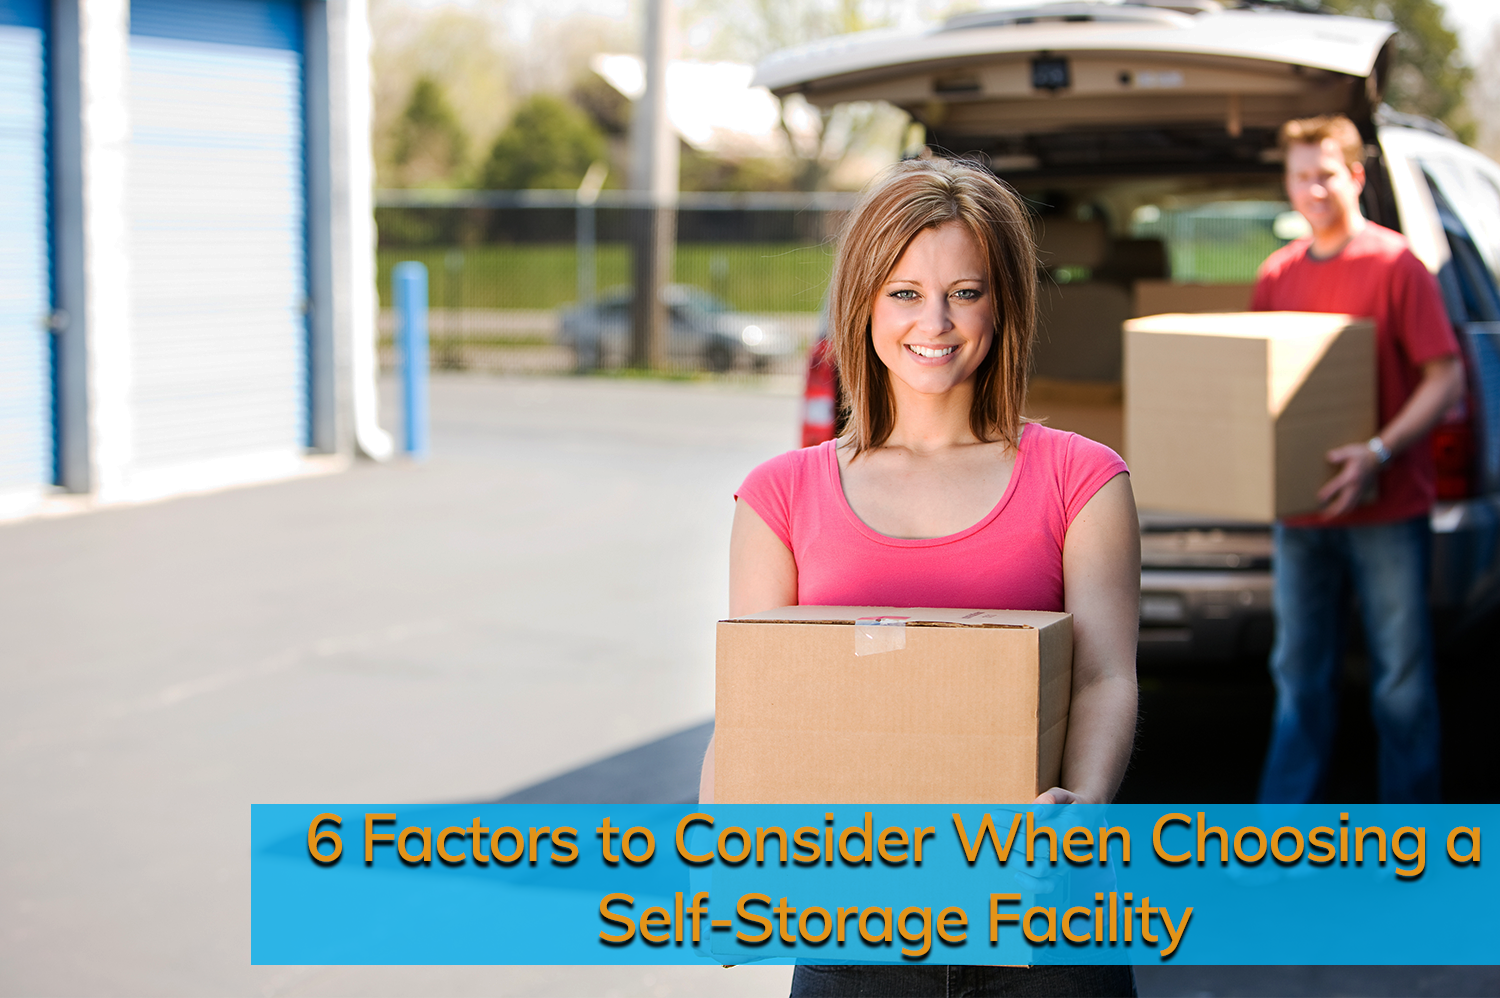 White woman with short blonde hair and pink t-shirt unloads boxes from her car at a self-storage facility.